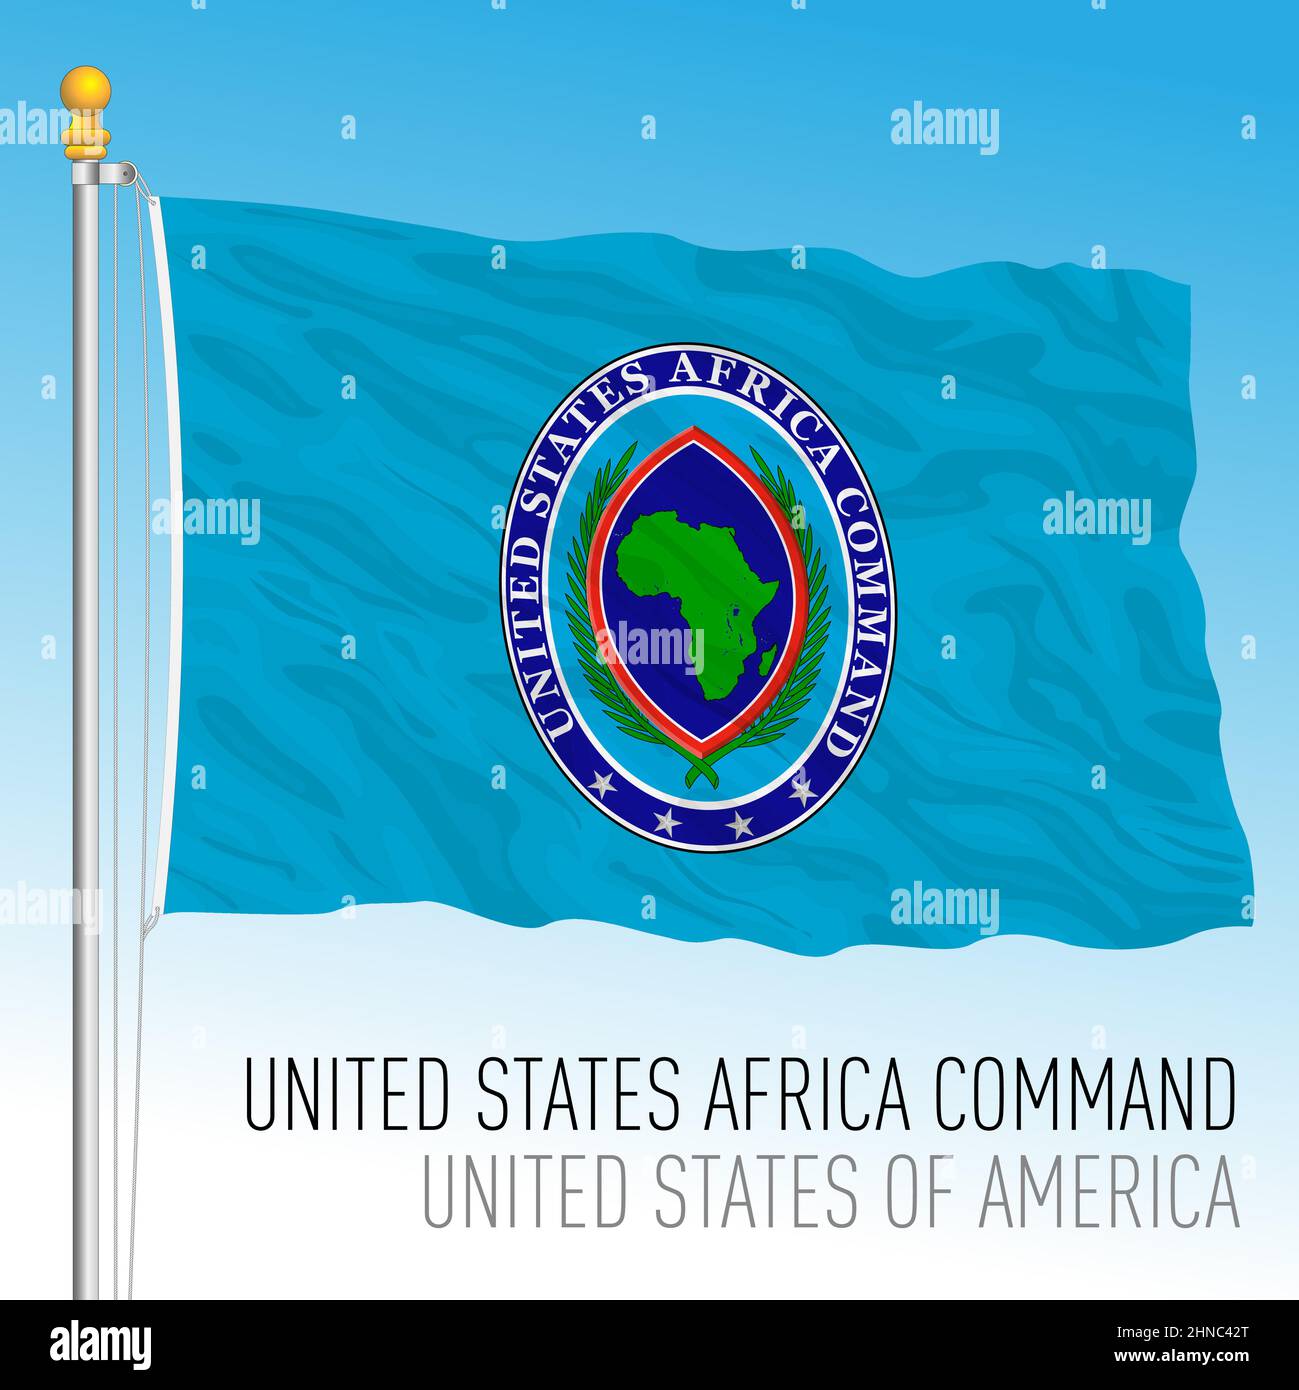 United States Army Africa Command flag, USA, vector illustration Stock Vector